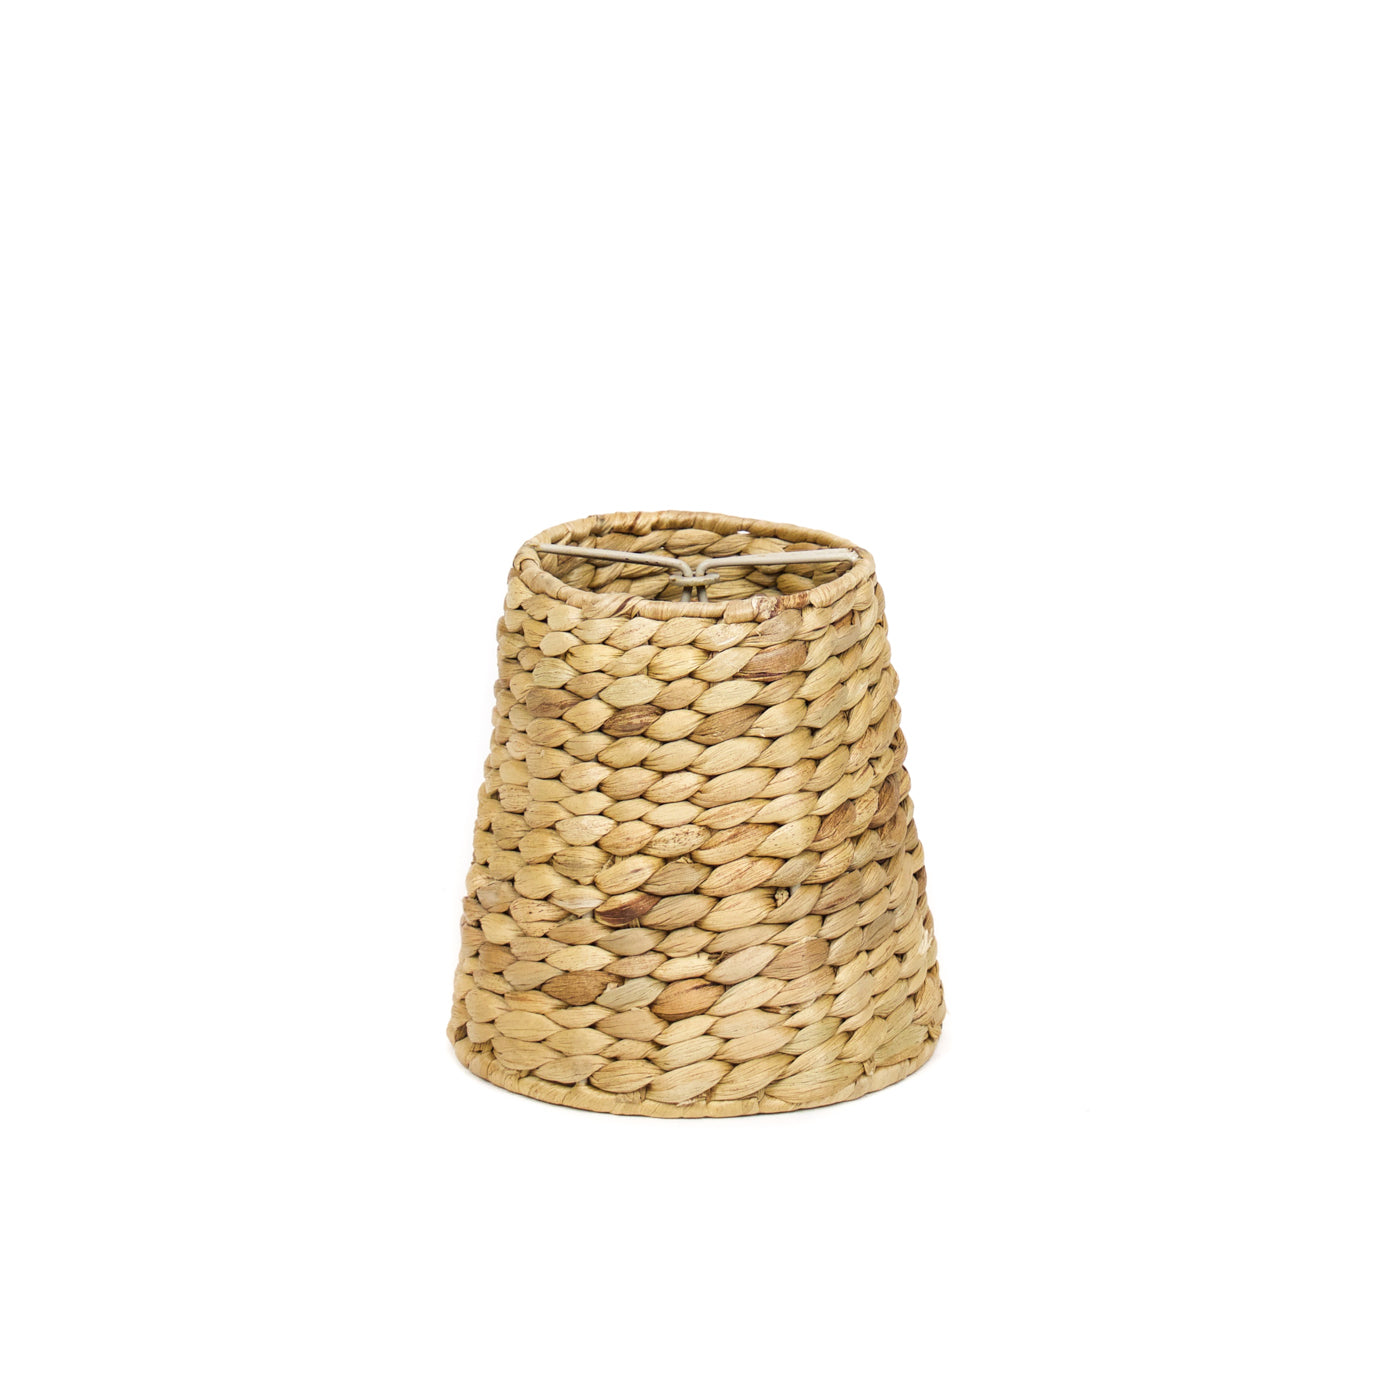 Sconce Lampshade- Water Hyacinth